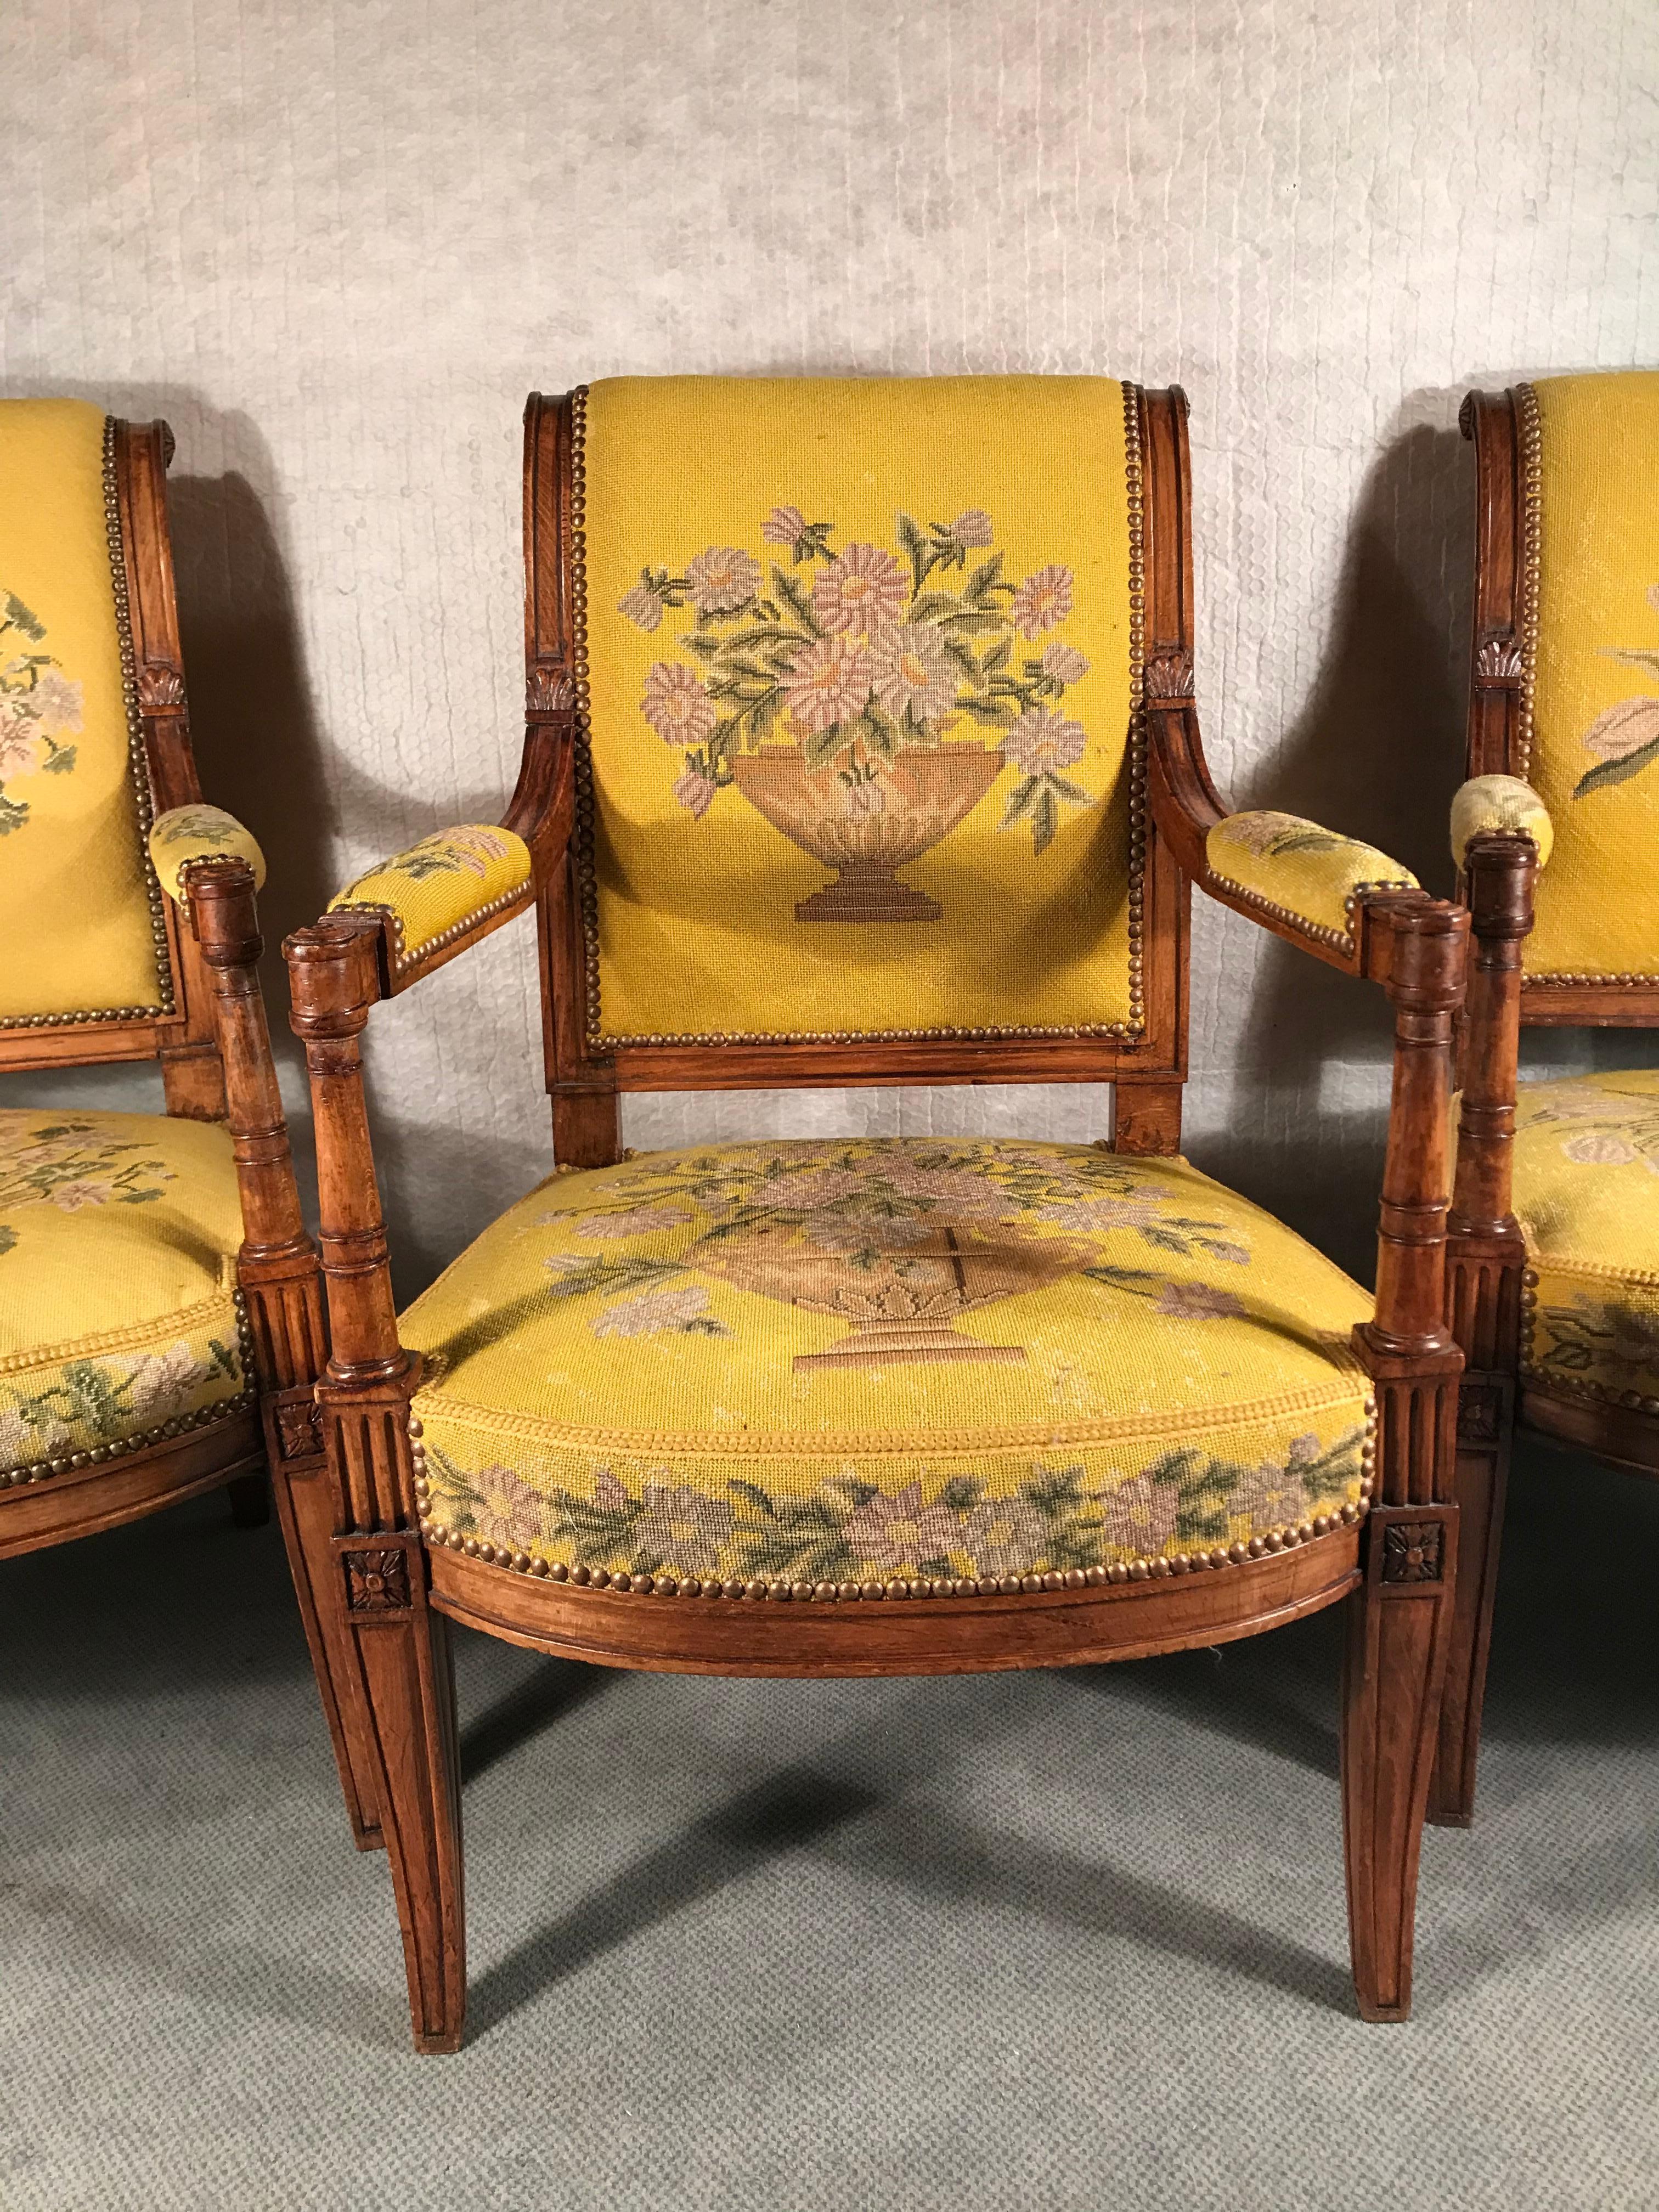 A set of three armchairs, Directoire style, France, 19th century
These elegant chairs are made of maple wood and have finely carved details. The chairs are covered with a pretty needlework fabric. They are in good original condition. 
The chairs